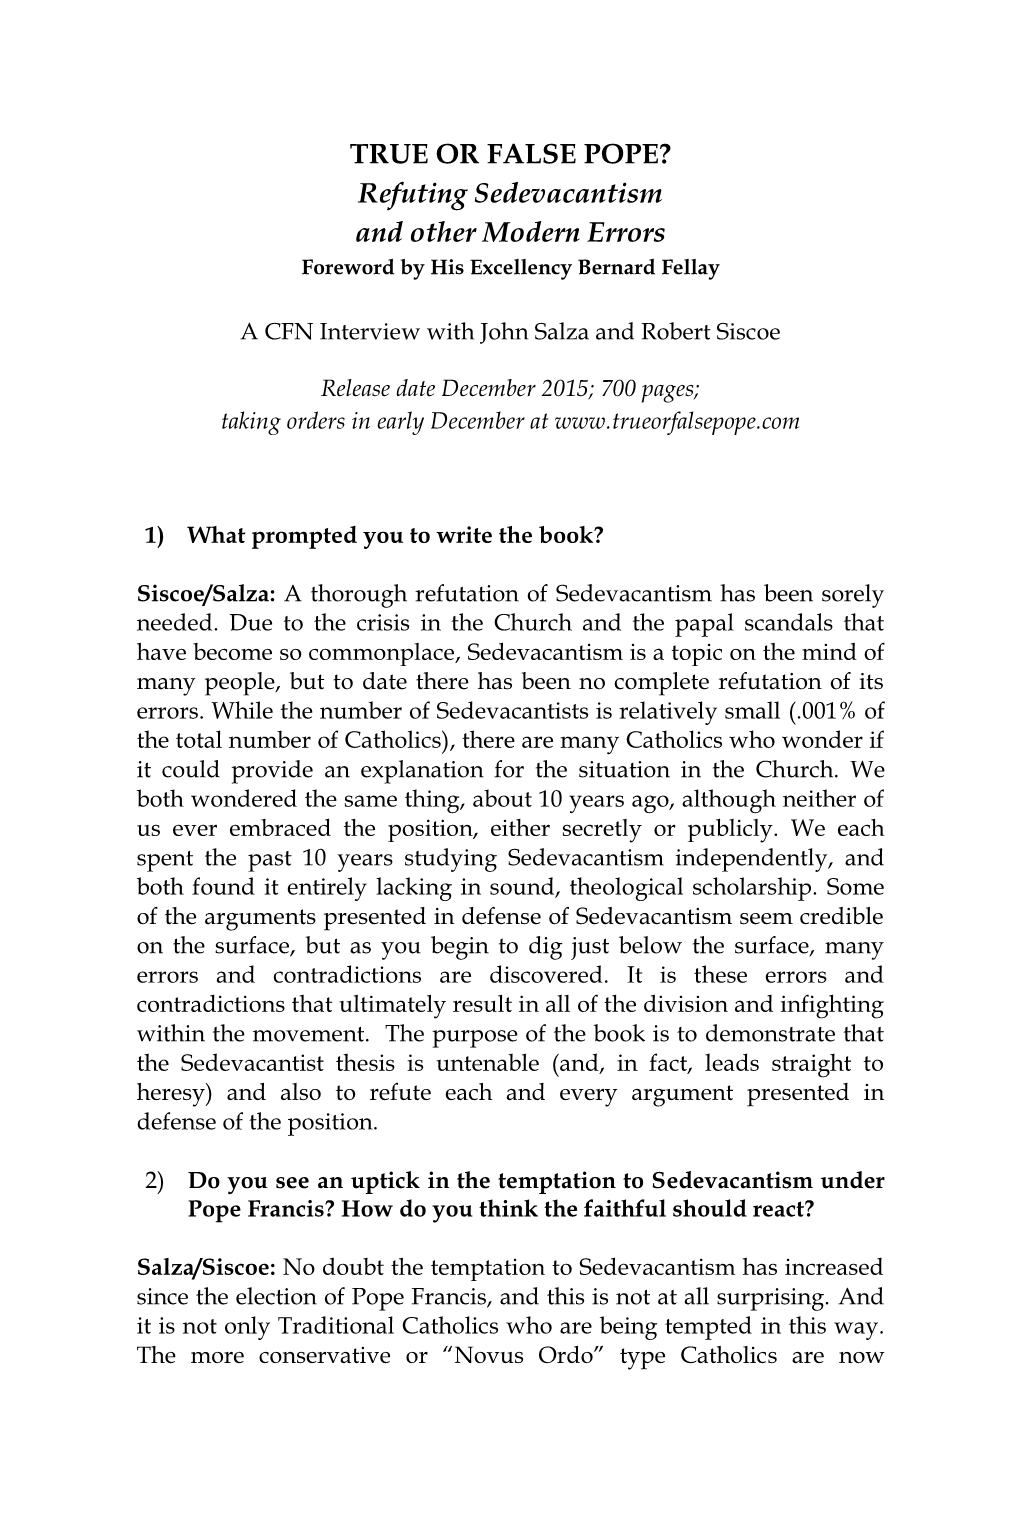 TRUE OR FALSE POPE? Refuting Sedevacantism and Other Modern Errors Foreword by His Excellency Bernard Fellay